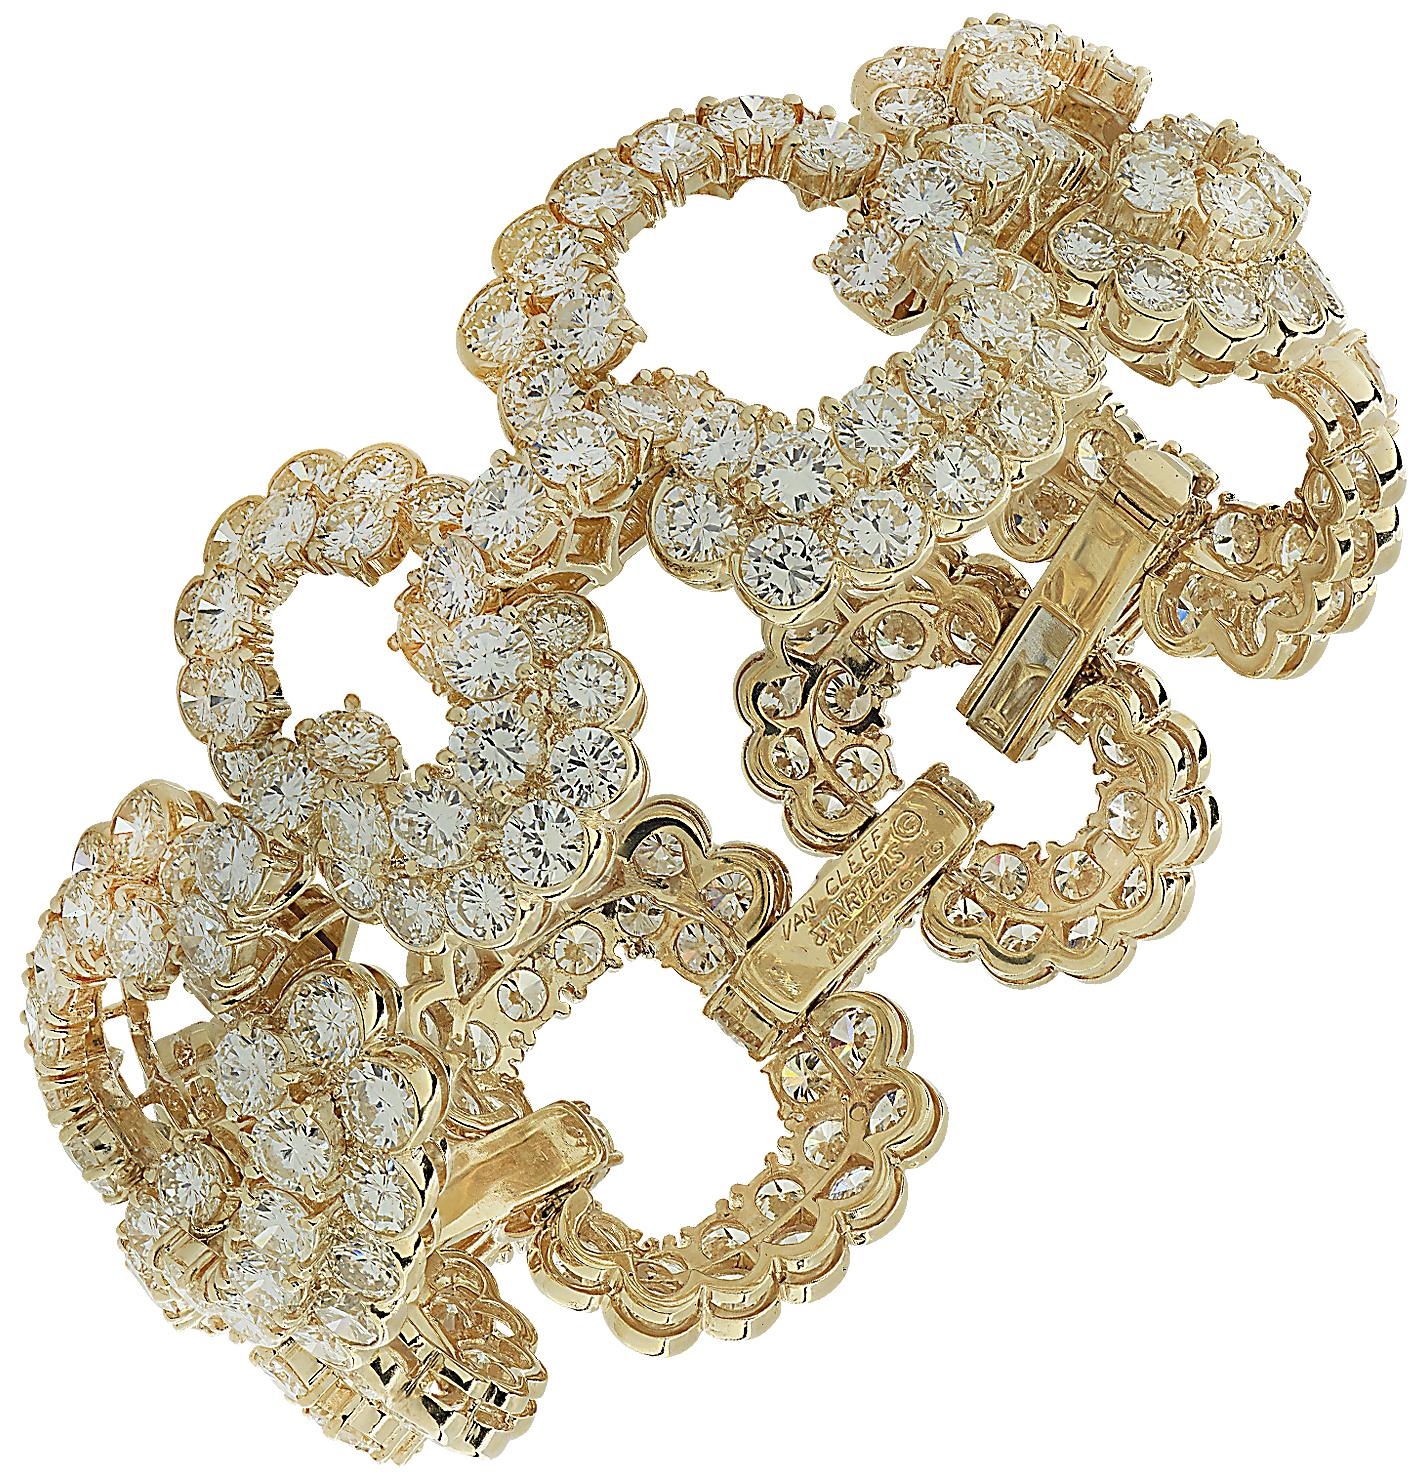 Exquisite 1970’s Van Cleef & Arpels classic high jewelry, diamond bracelet, finely crafted in 18 karat yellow gold, featuring 240 round brilliant cut diamonds weighing 40 carats total, D-F color, VS clarity. The diamonds are fashioned into a